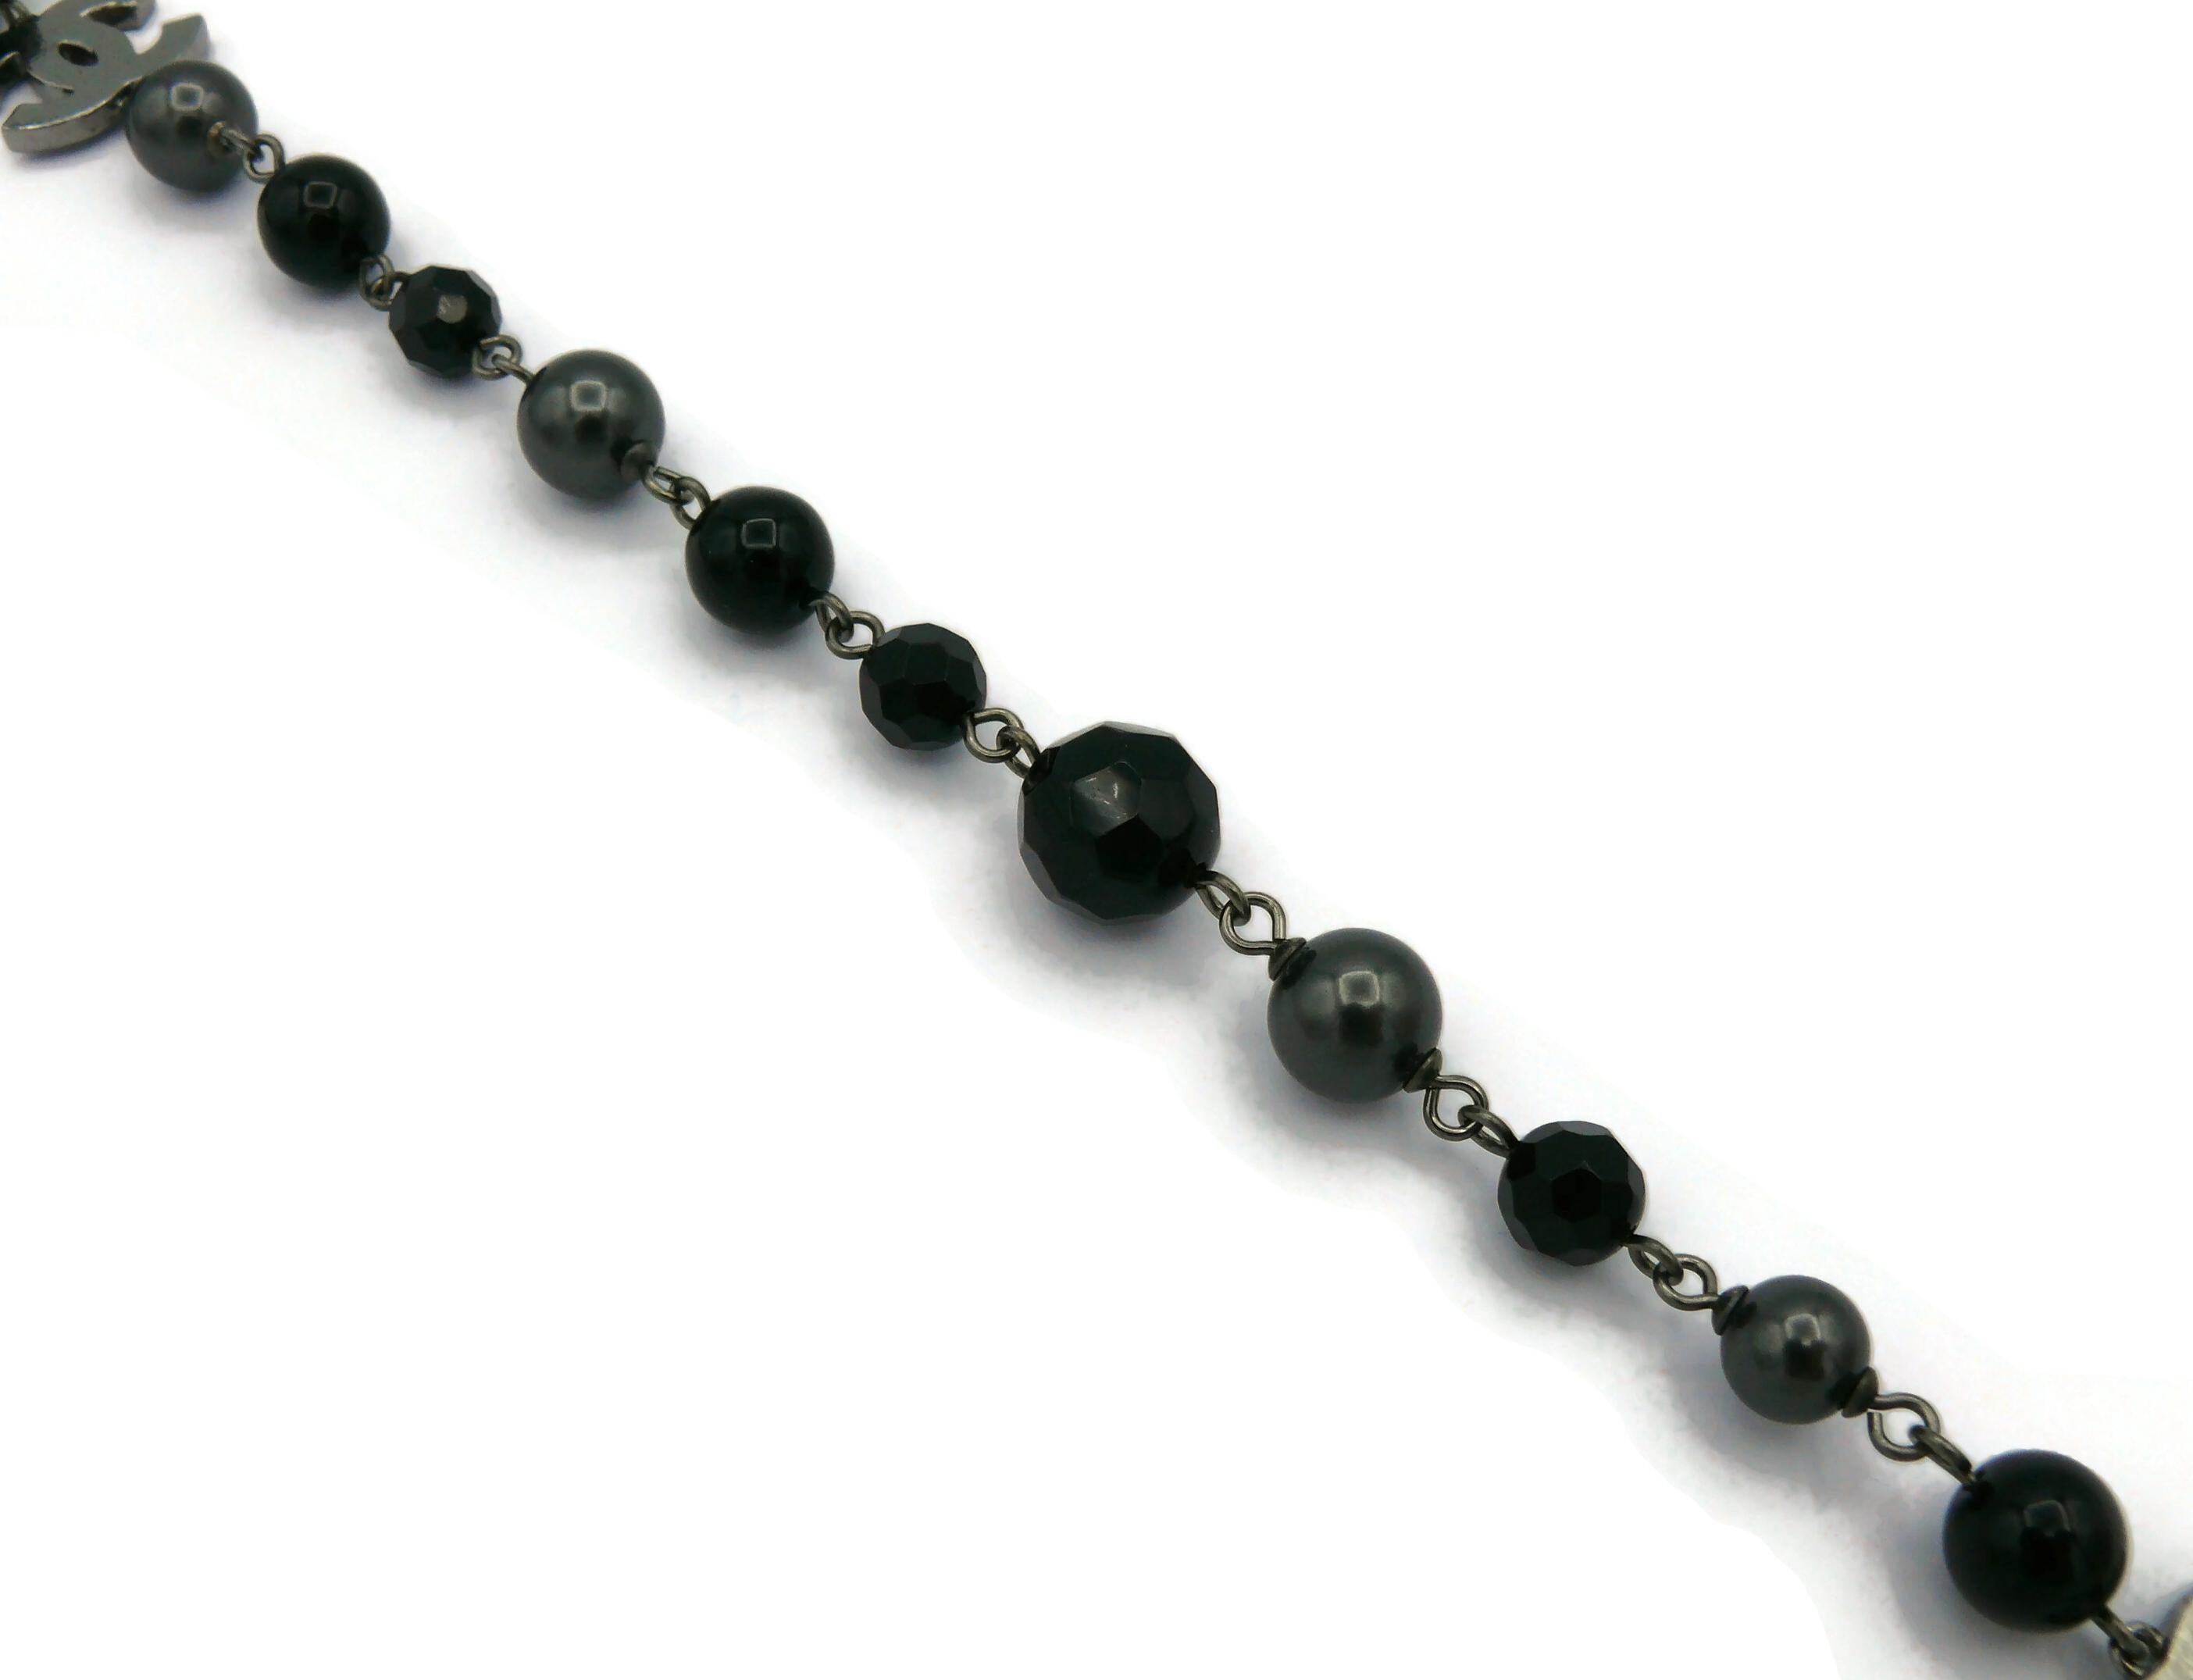 CHANEL by KARL LAGERFELD 2010 Grey Pearl and Black Bead CC Necklace For Sale 2